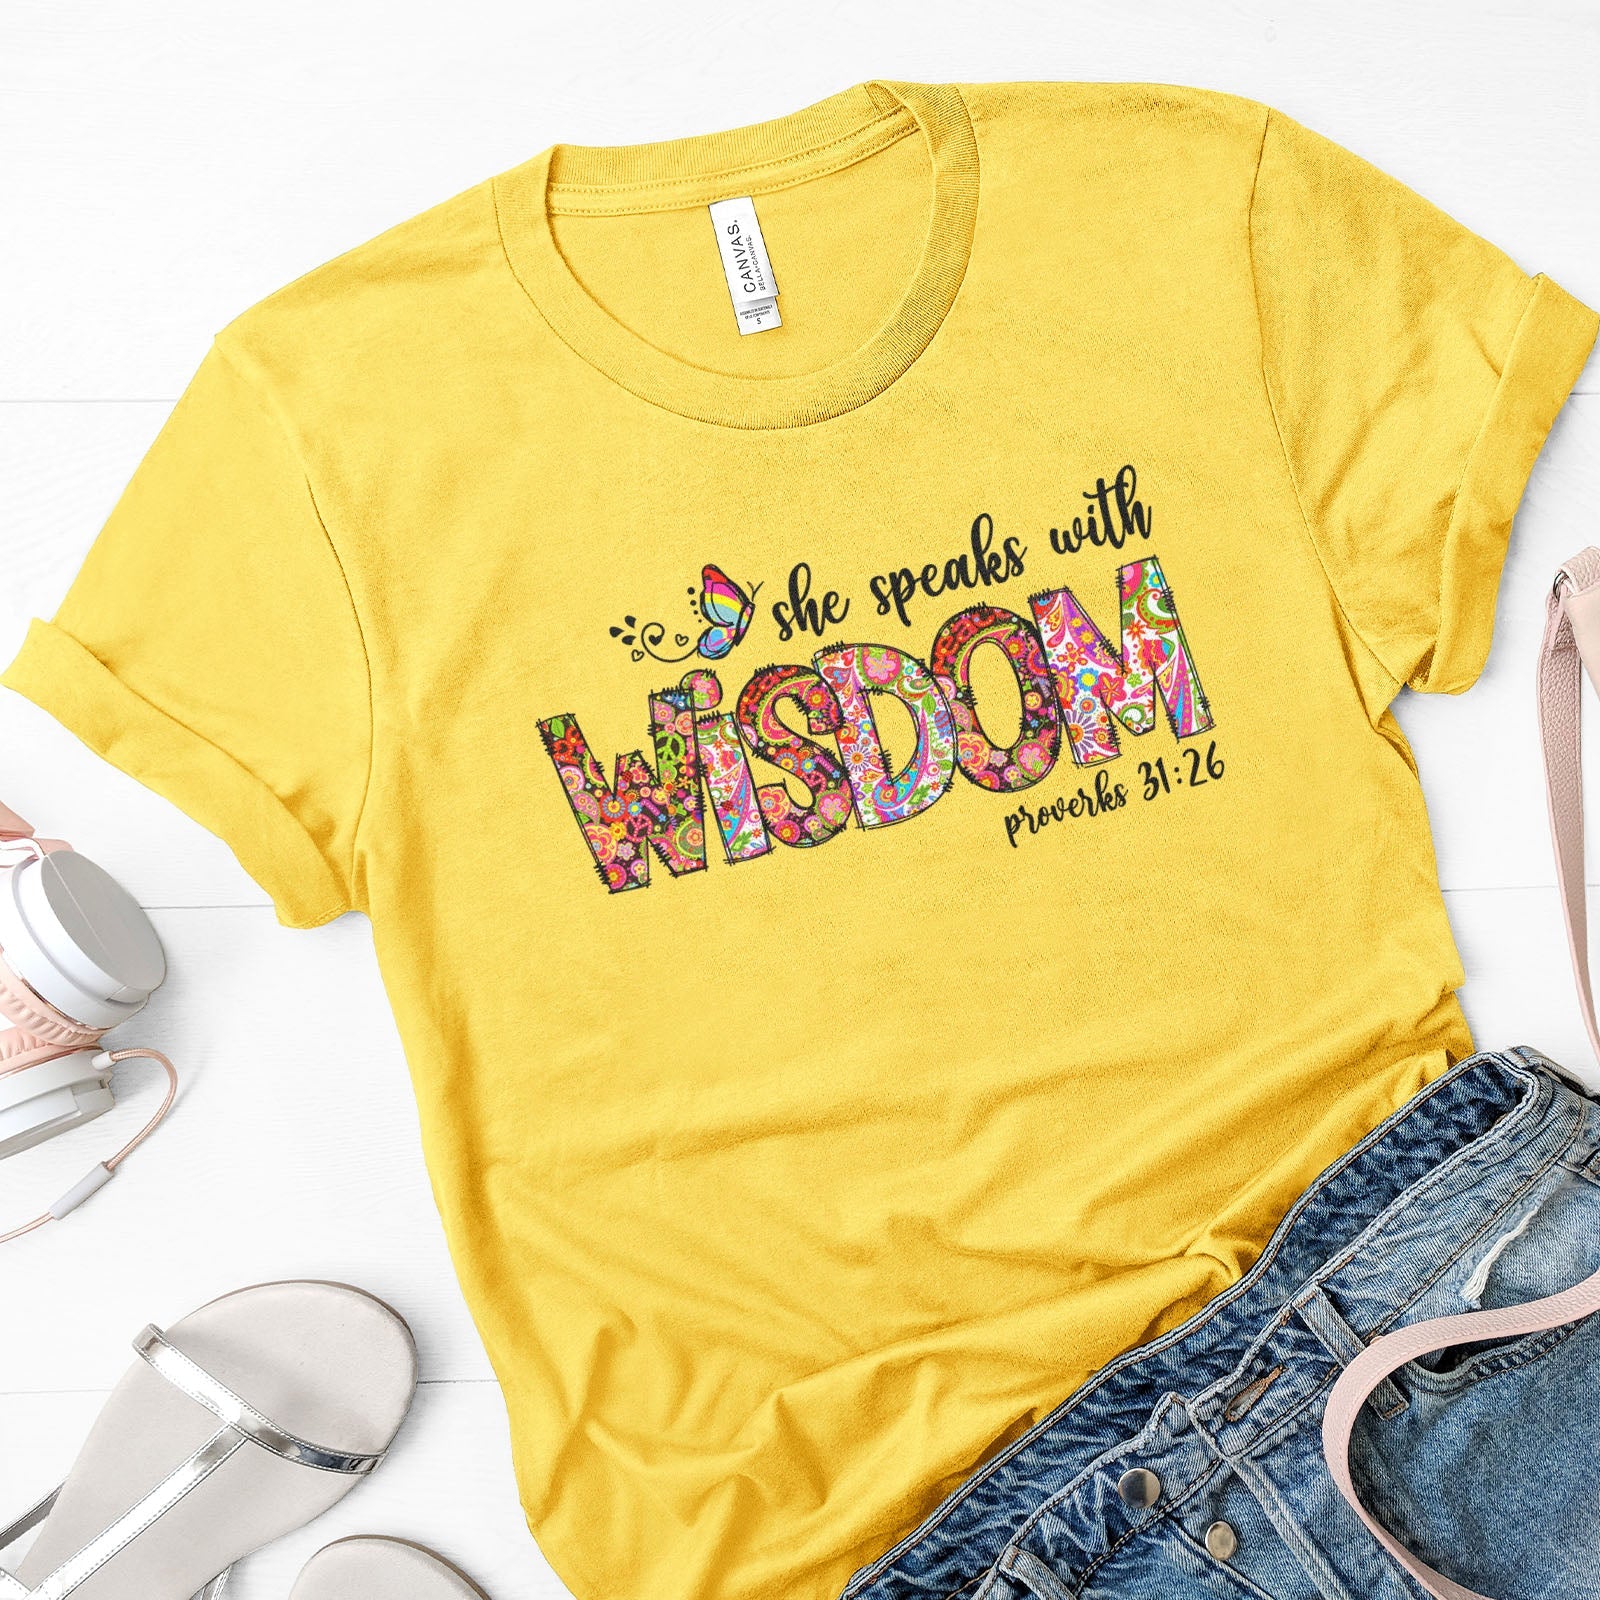 She Speaks With Wisdom Proverbs 31:26 Tee Shirts For Women - Christian Shirts for Women - Religious Tee Shirts